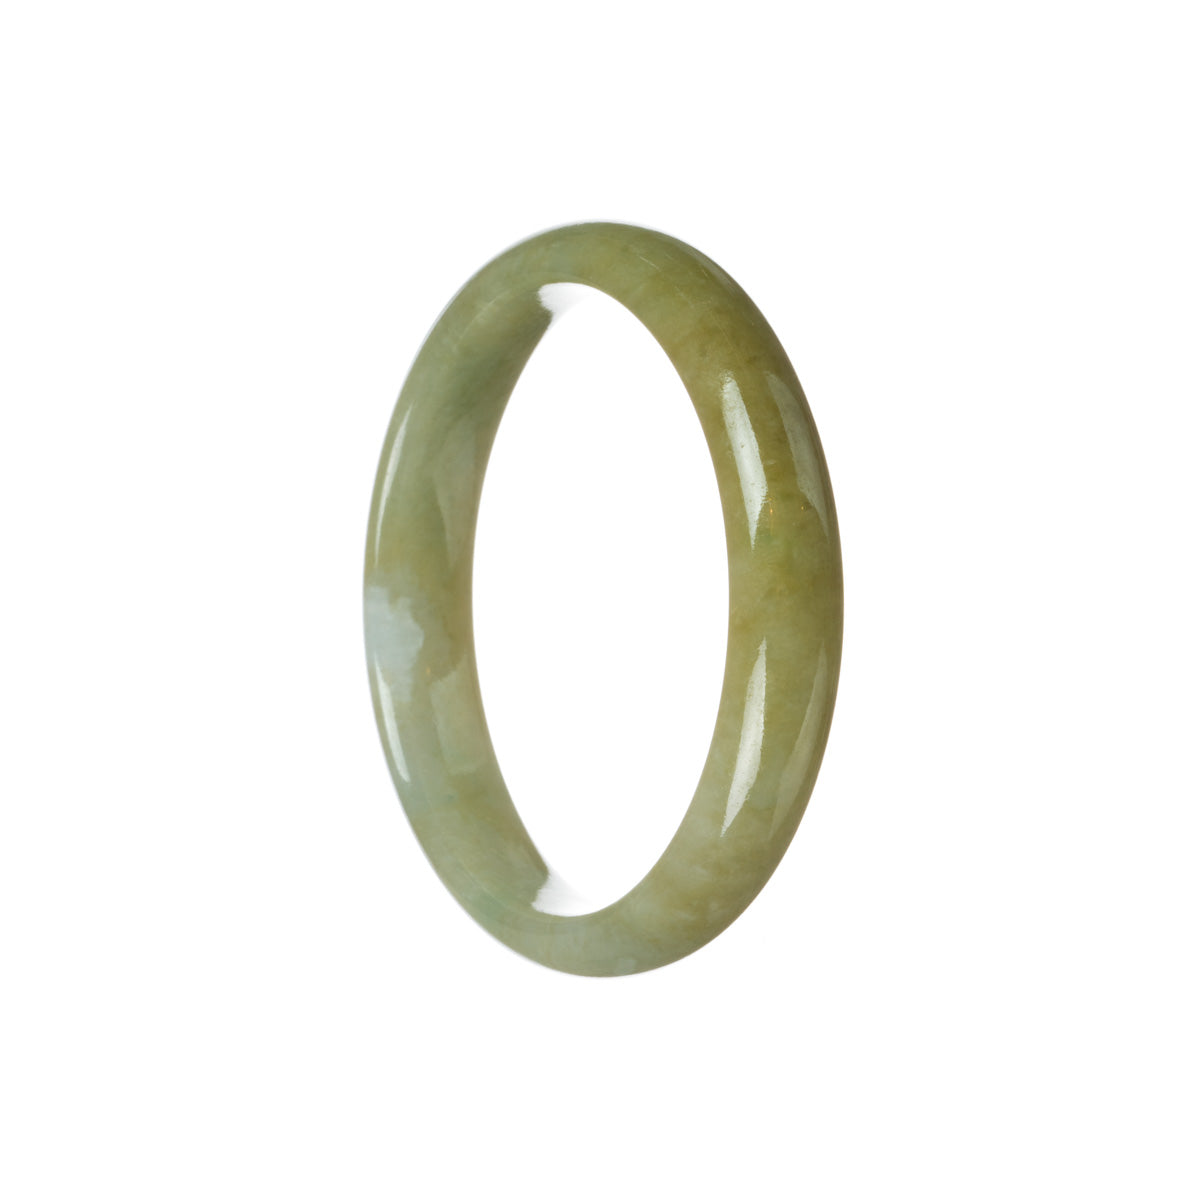 A close-up photo of a certified Grade A brownish green jadeite jade bracelet. The bracelet is in the shape of a half moon and measures 59mm. It features a unique white patch on one side. Sold by MAYS™.